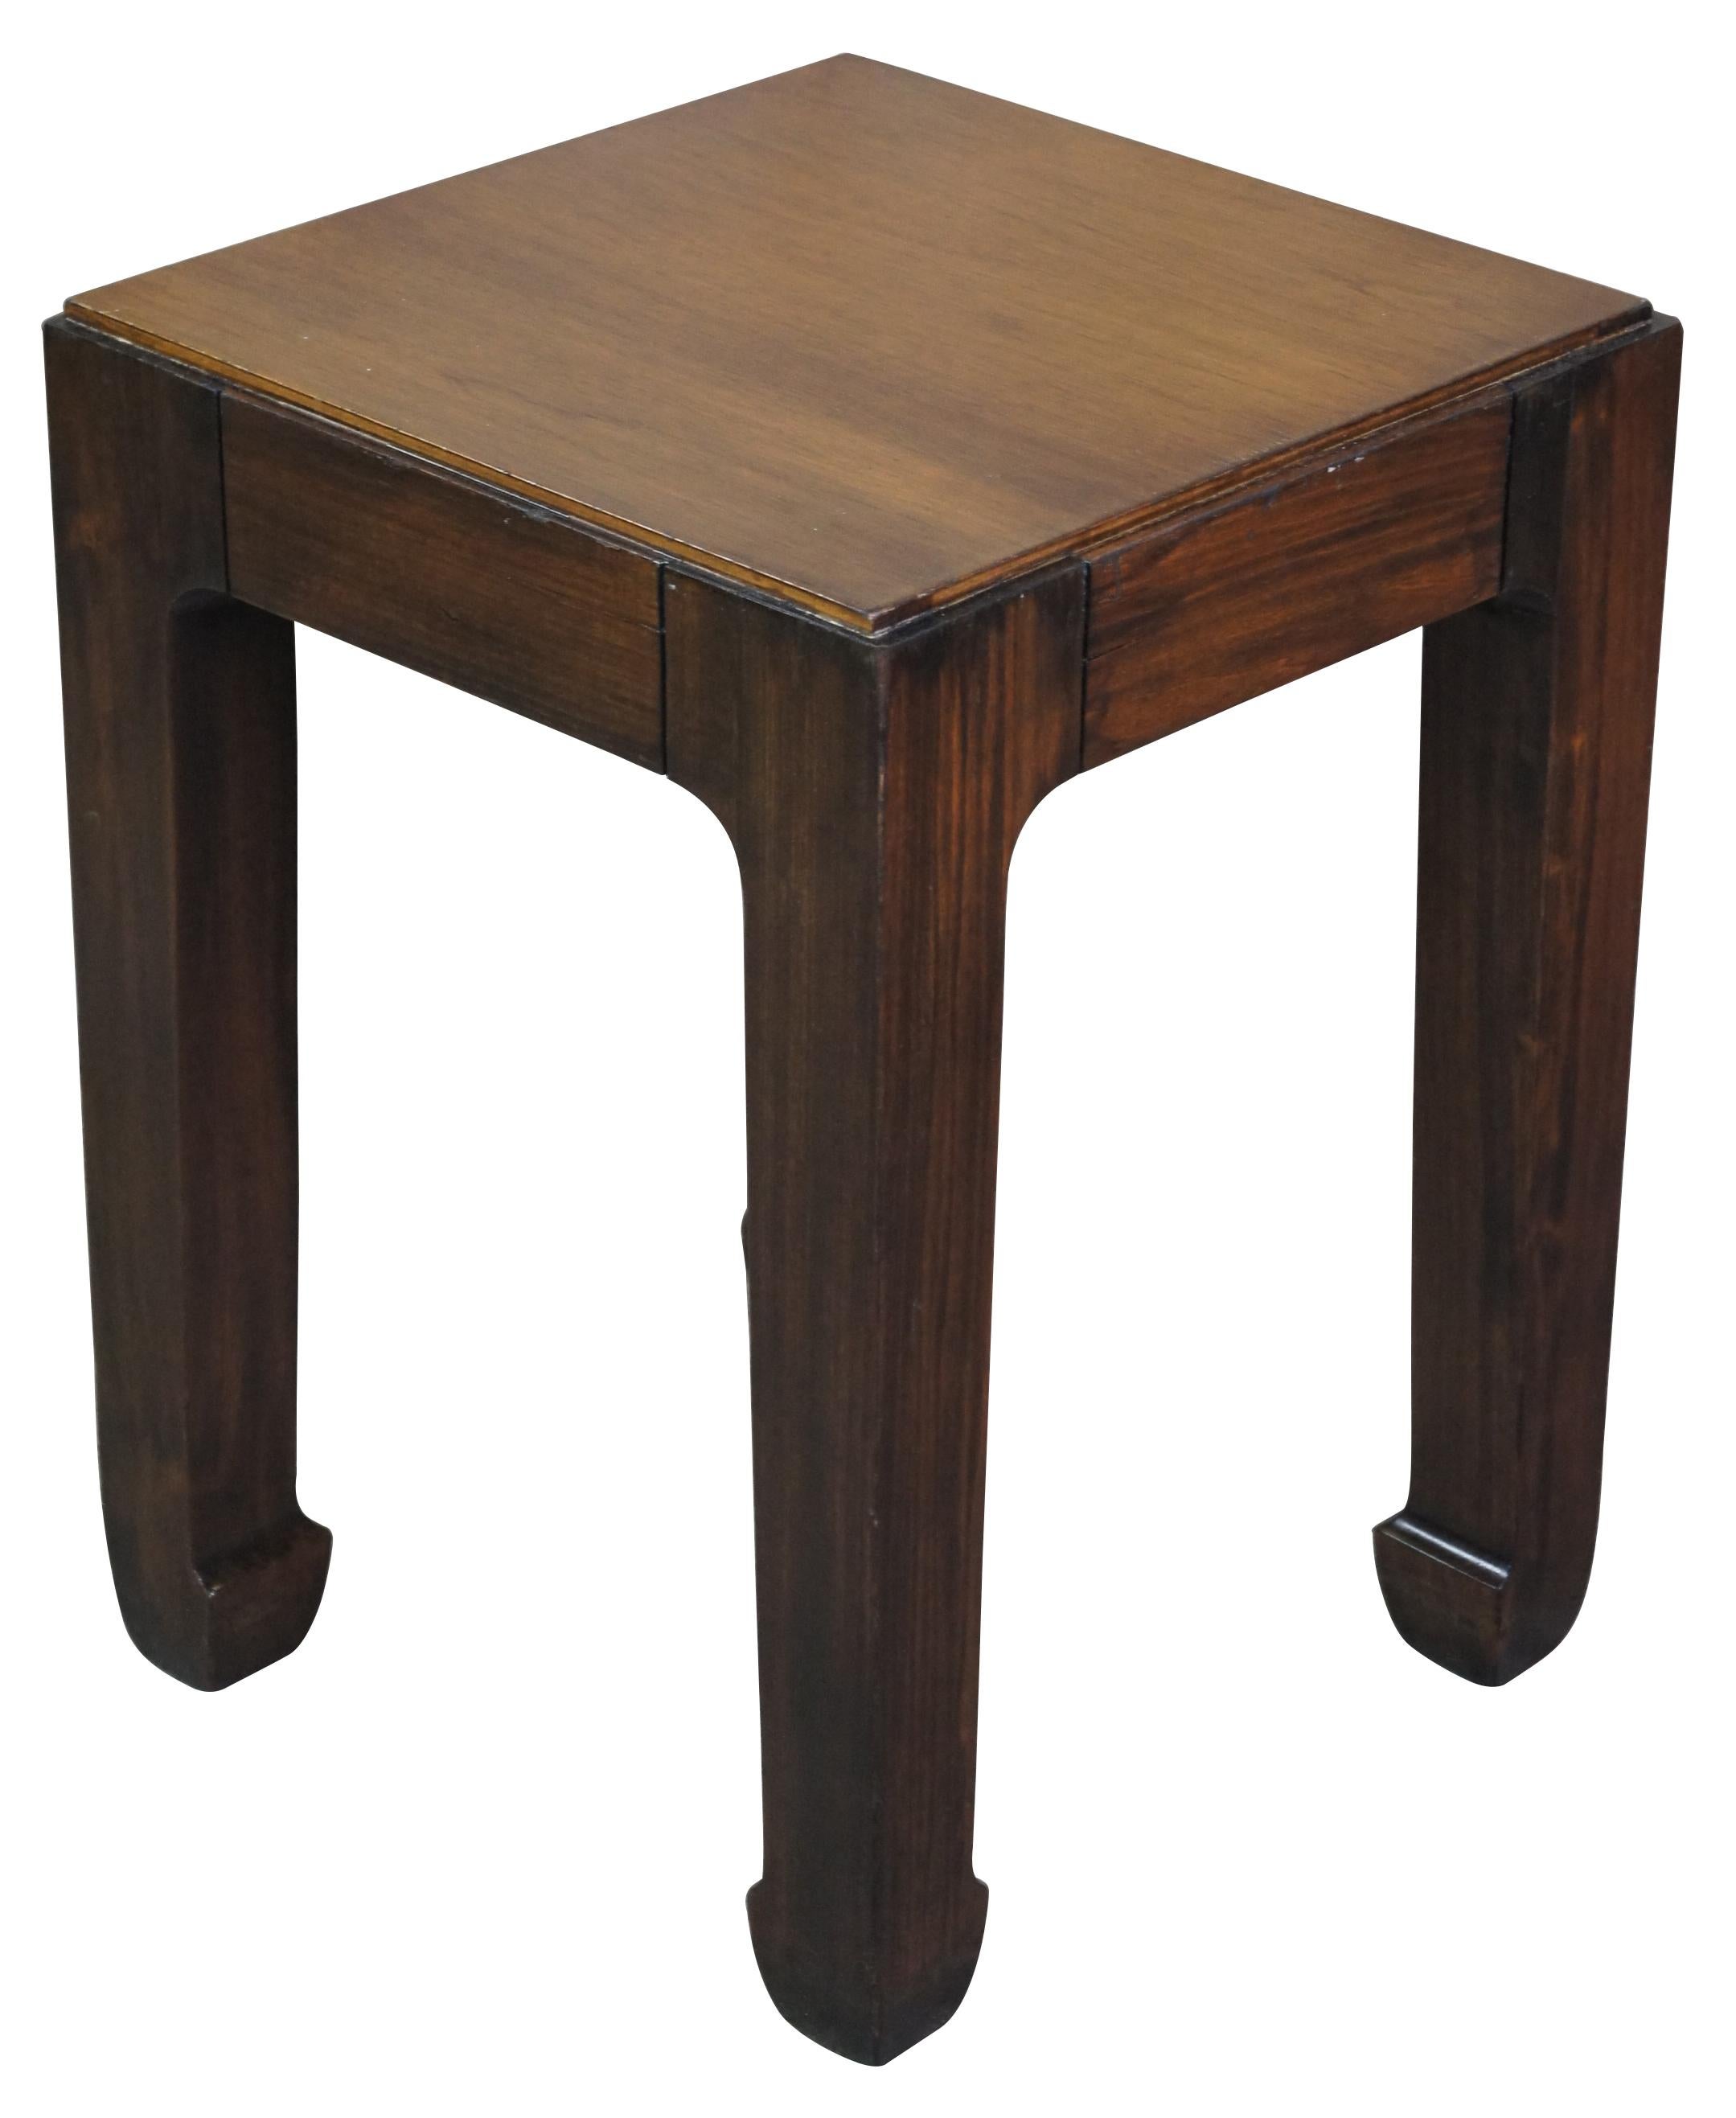 1980s chinoiserie Lane Altavista side table. Made of walnut featuring square form with chinoiserie style legs and glass top. Manufactured on February, 2nd 1980. Style No. 1024 66. Measure: 23